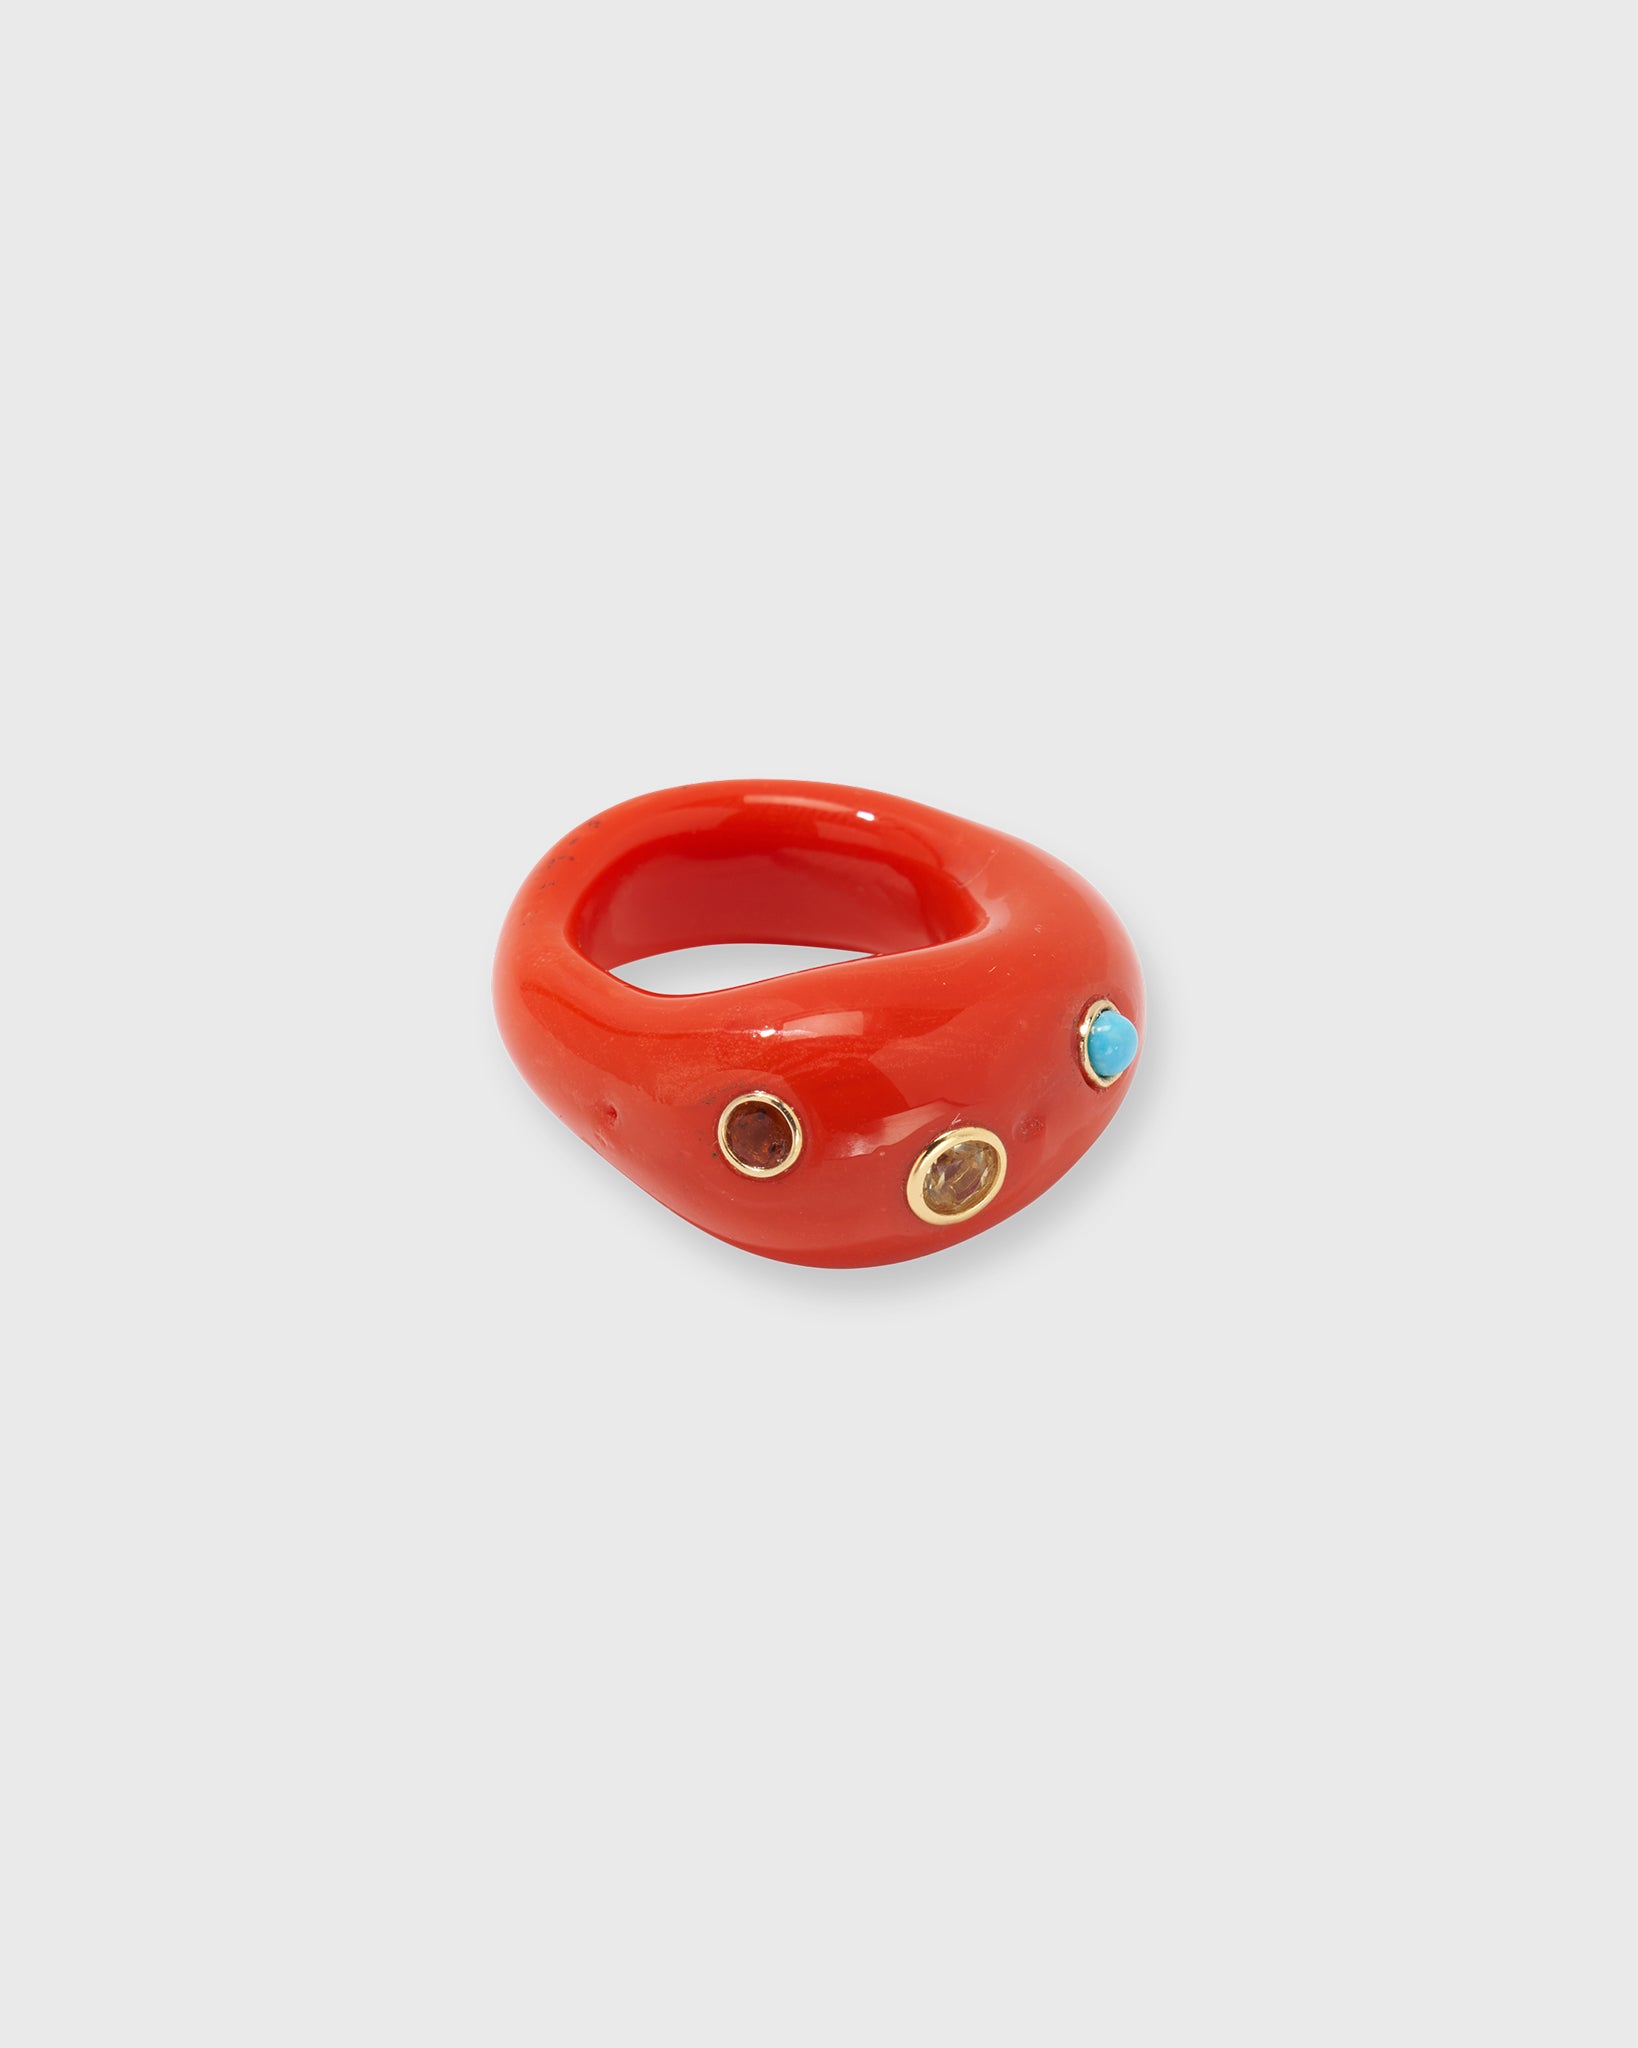 Monument Ring in Red Hot